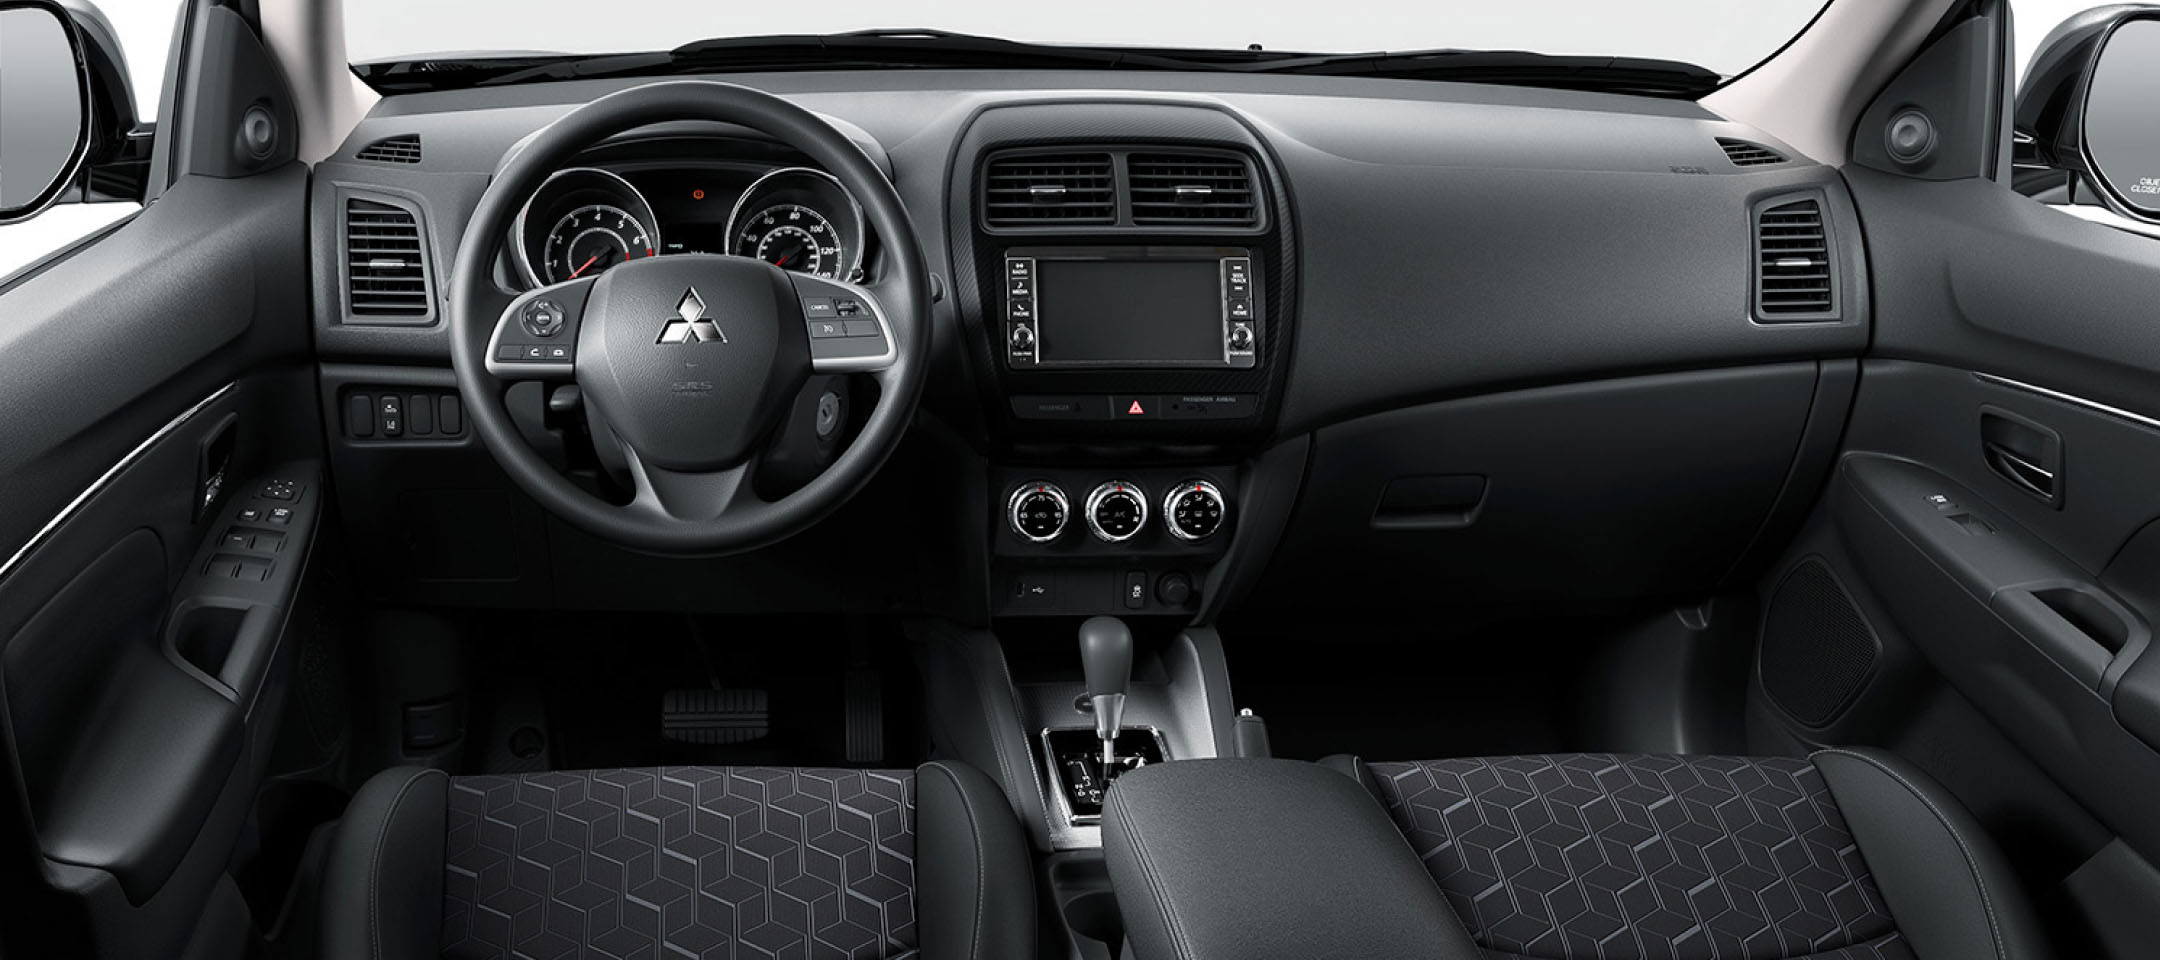 2023 Mitsubishi Outlander Sport SUV steering wheel and touchscreen